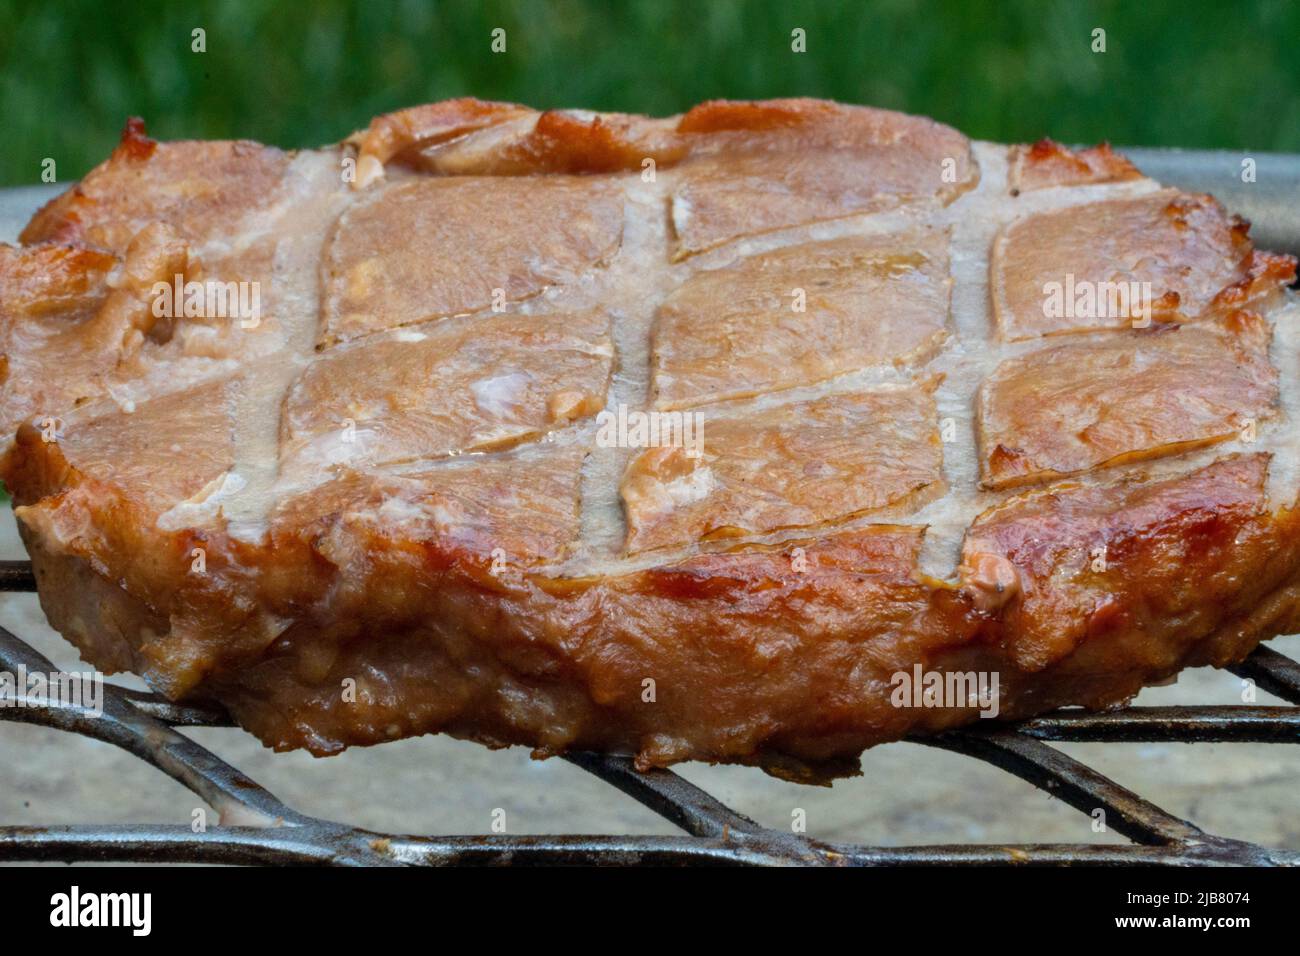 A delicious turkey burger with grill marks atop a fire pit grill Stock Photo